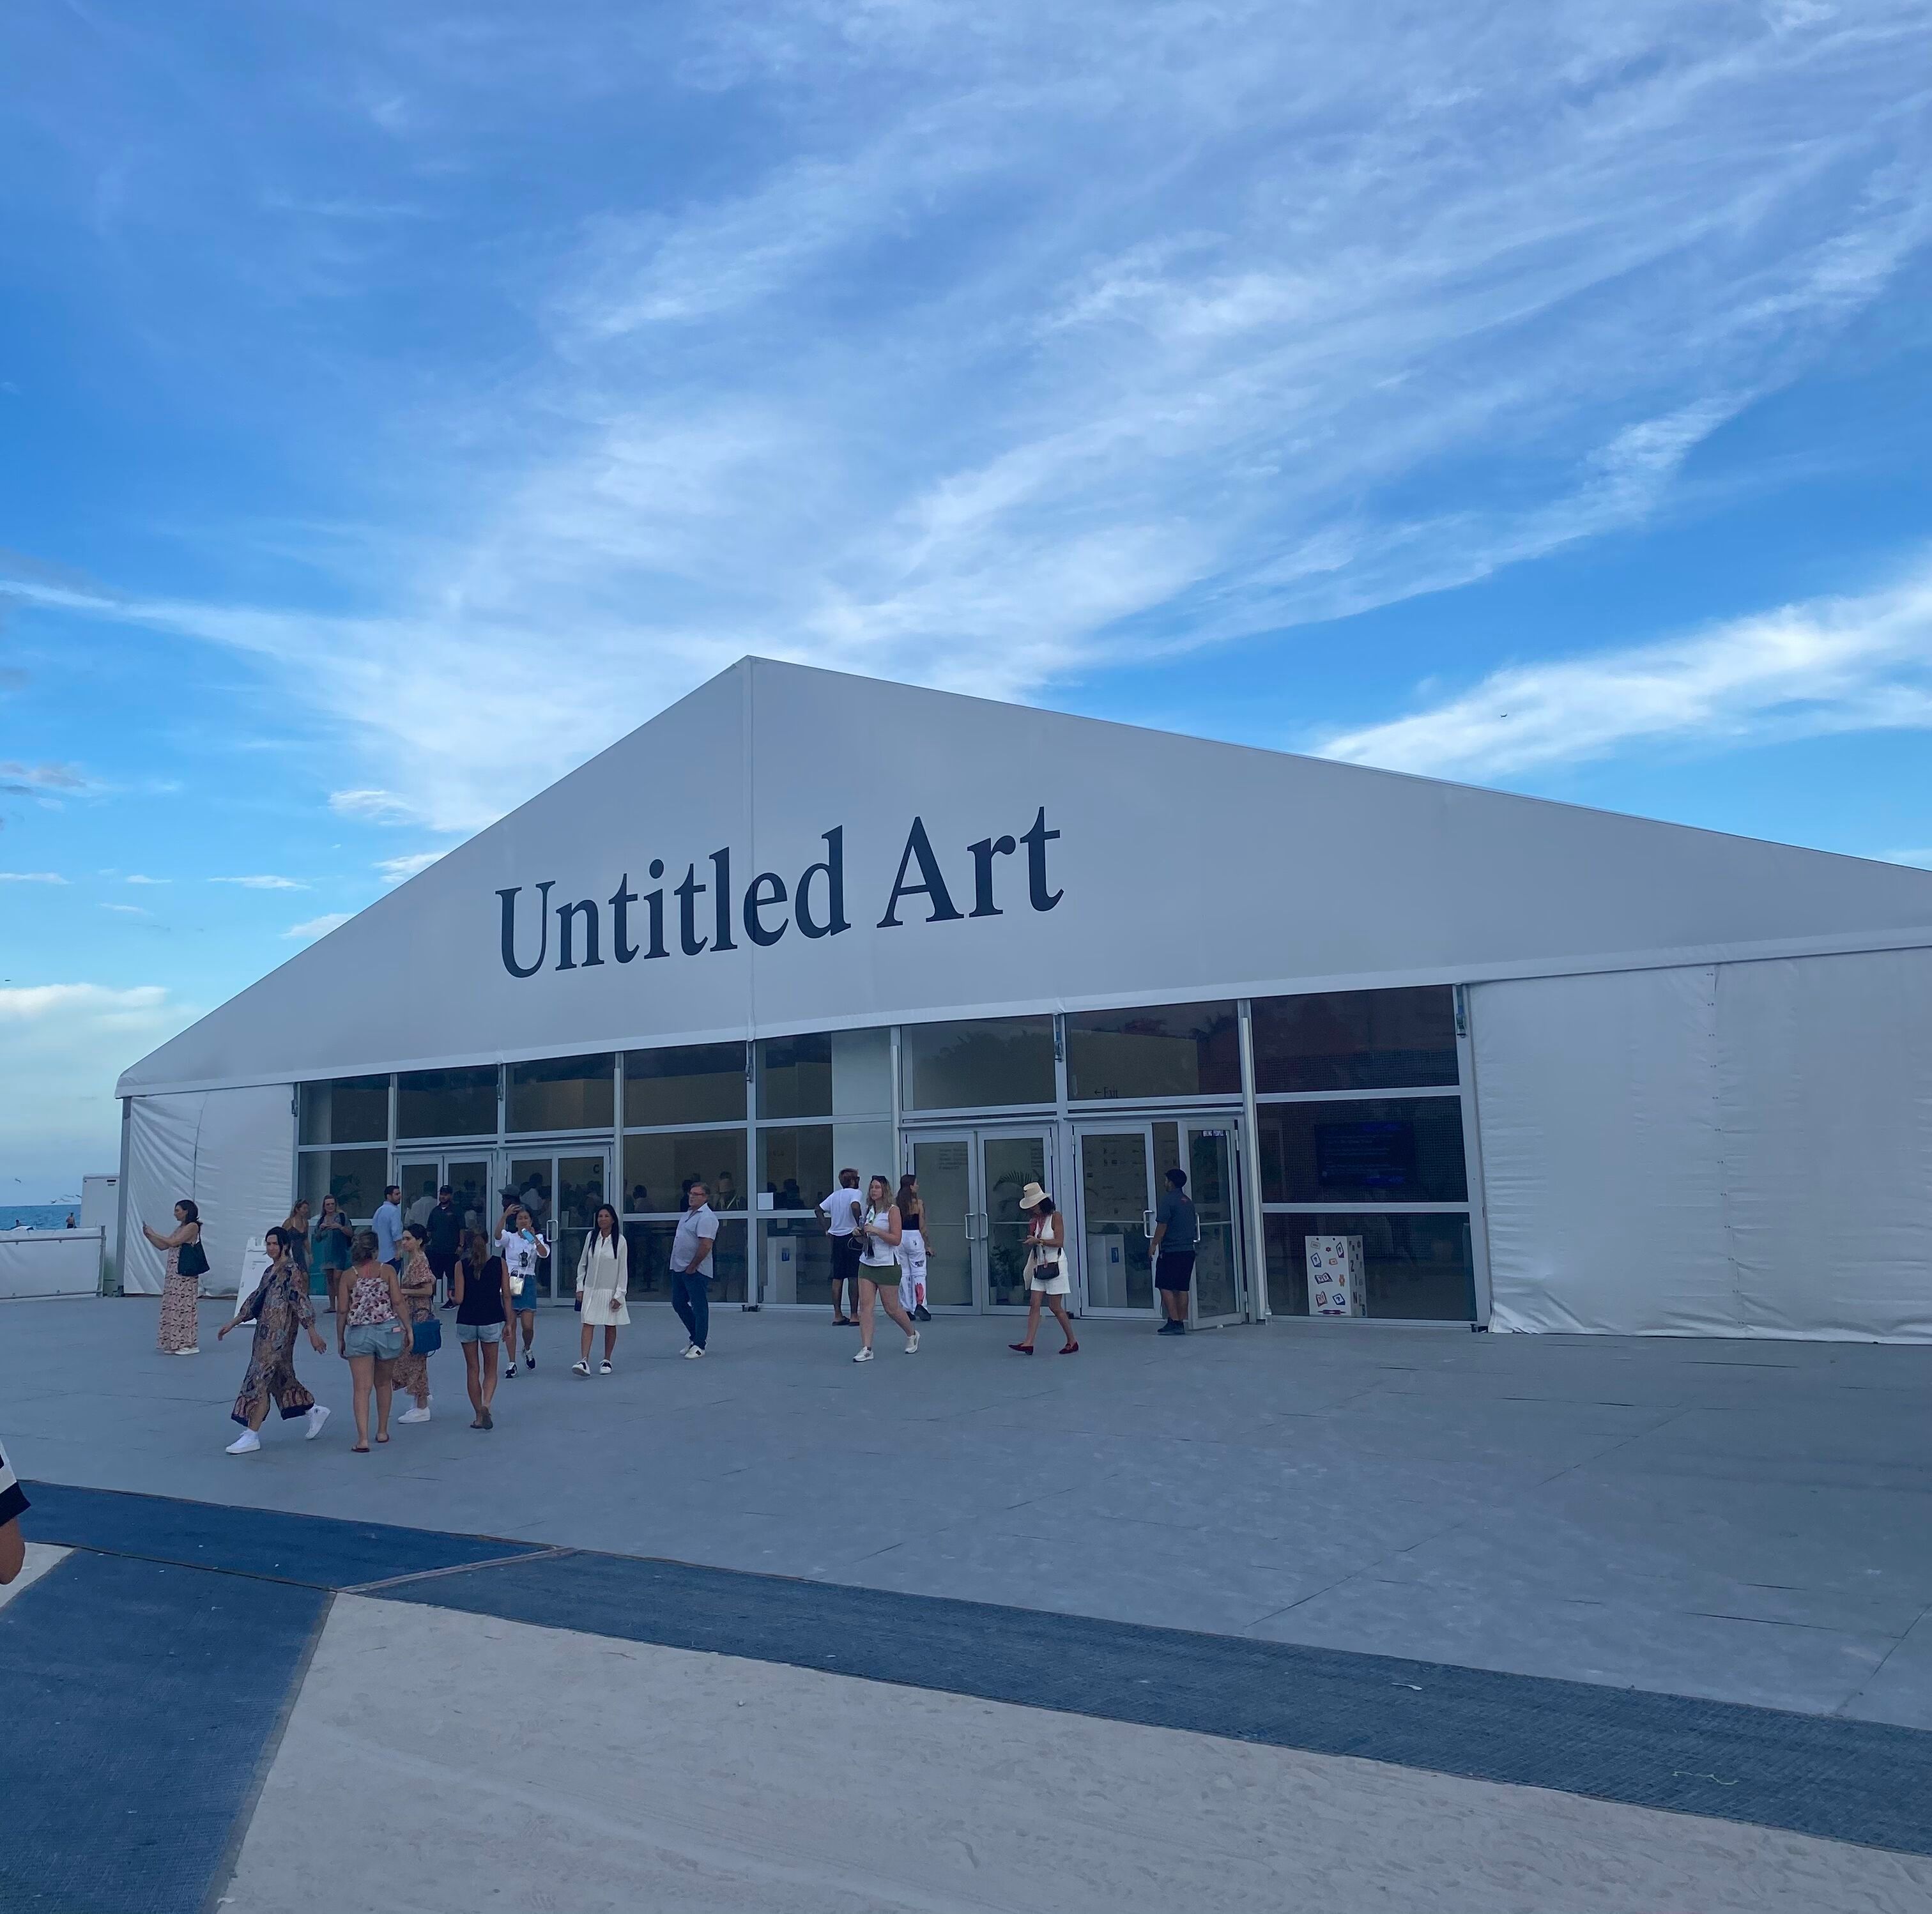 Miami Art Week Artillery Report: Day 2 Untitled Art and The Bass Museum